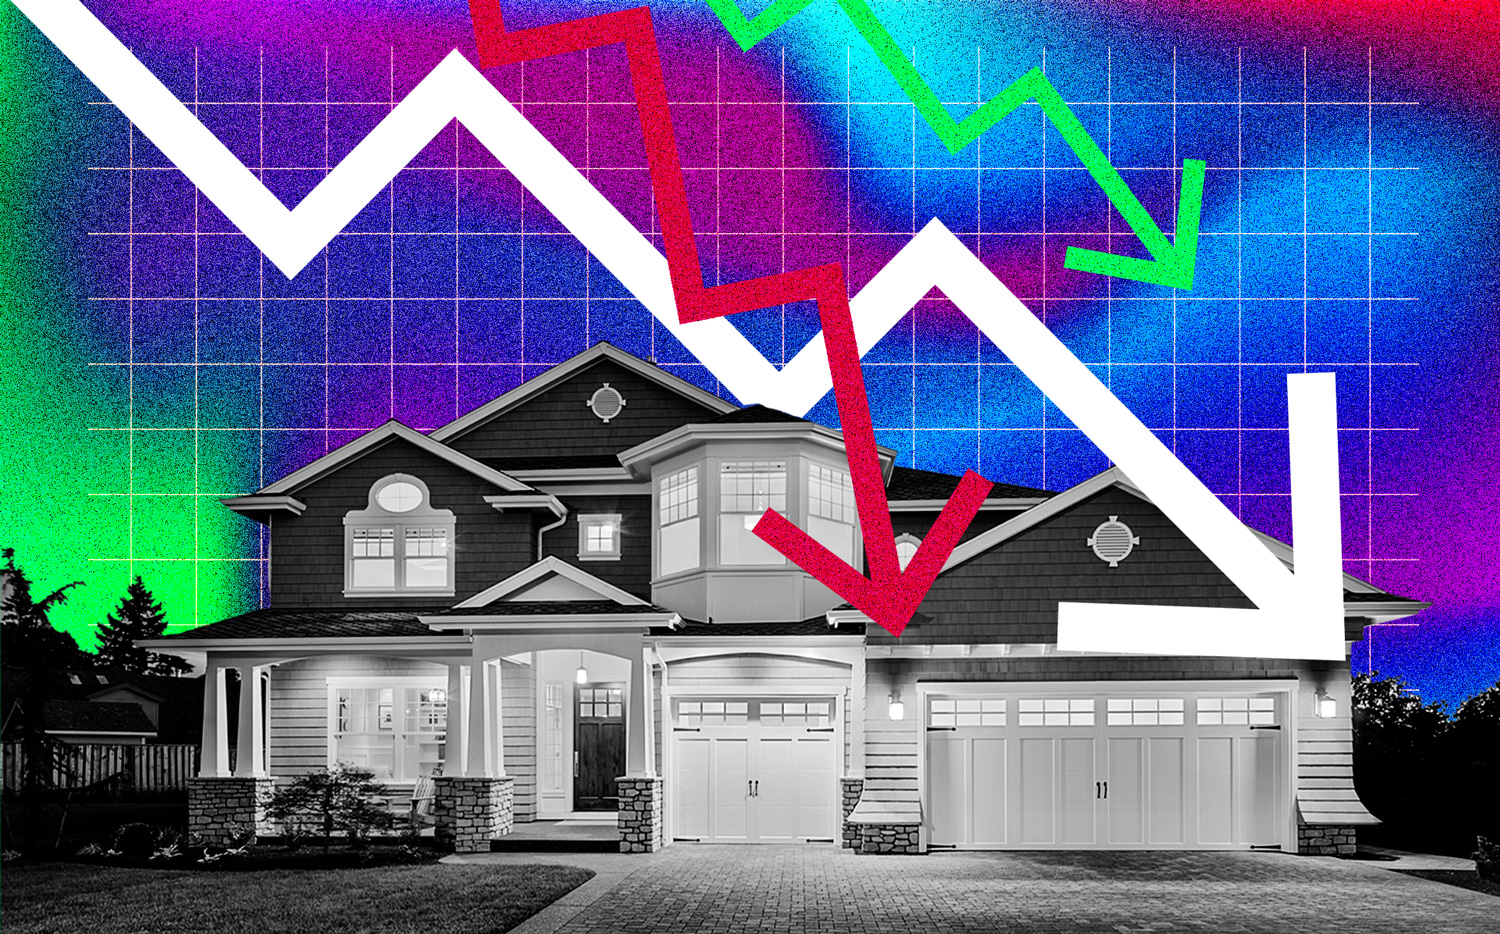 Existing home sales notch 12th month of decline 